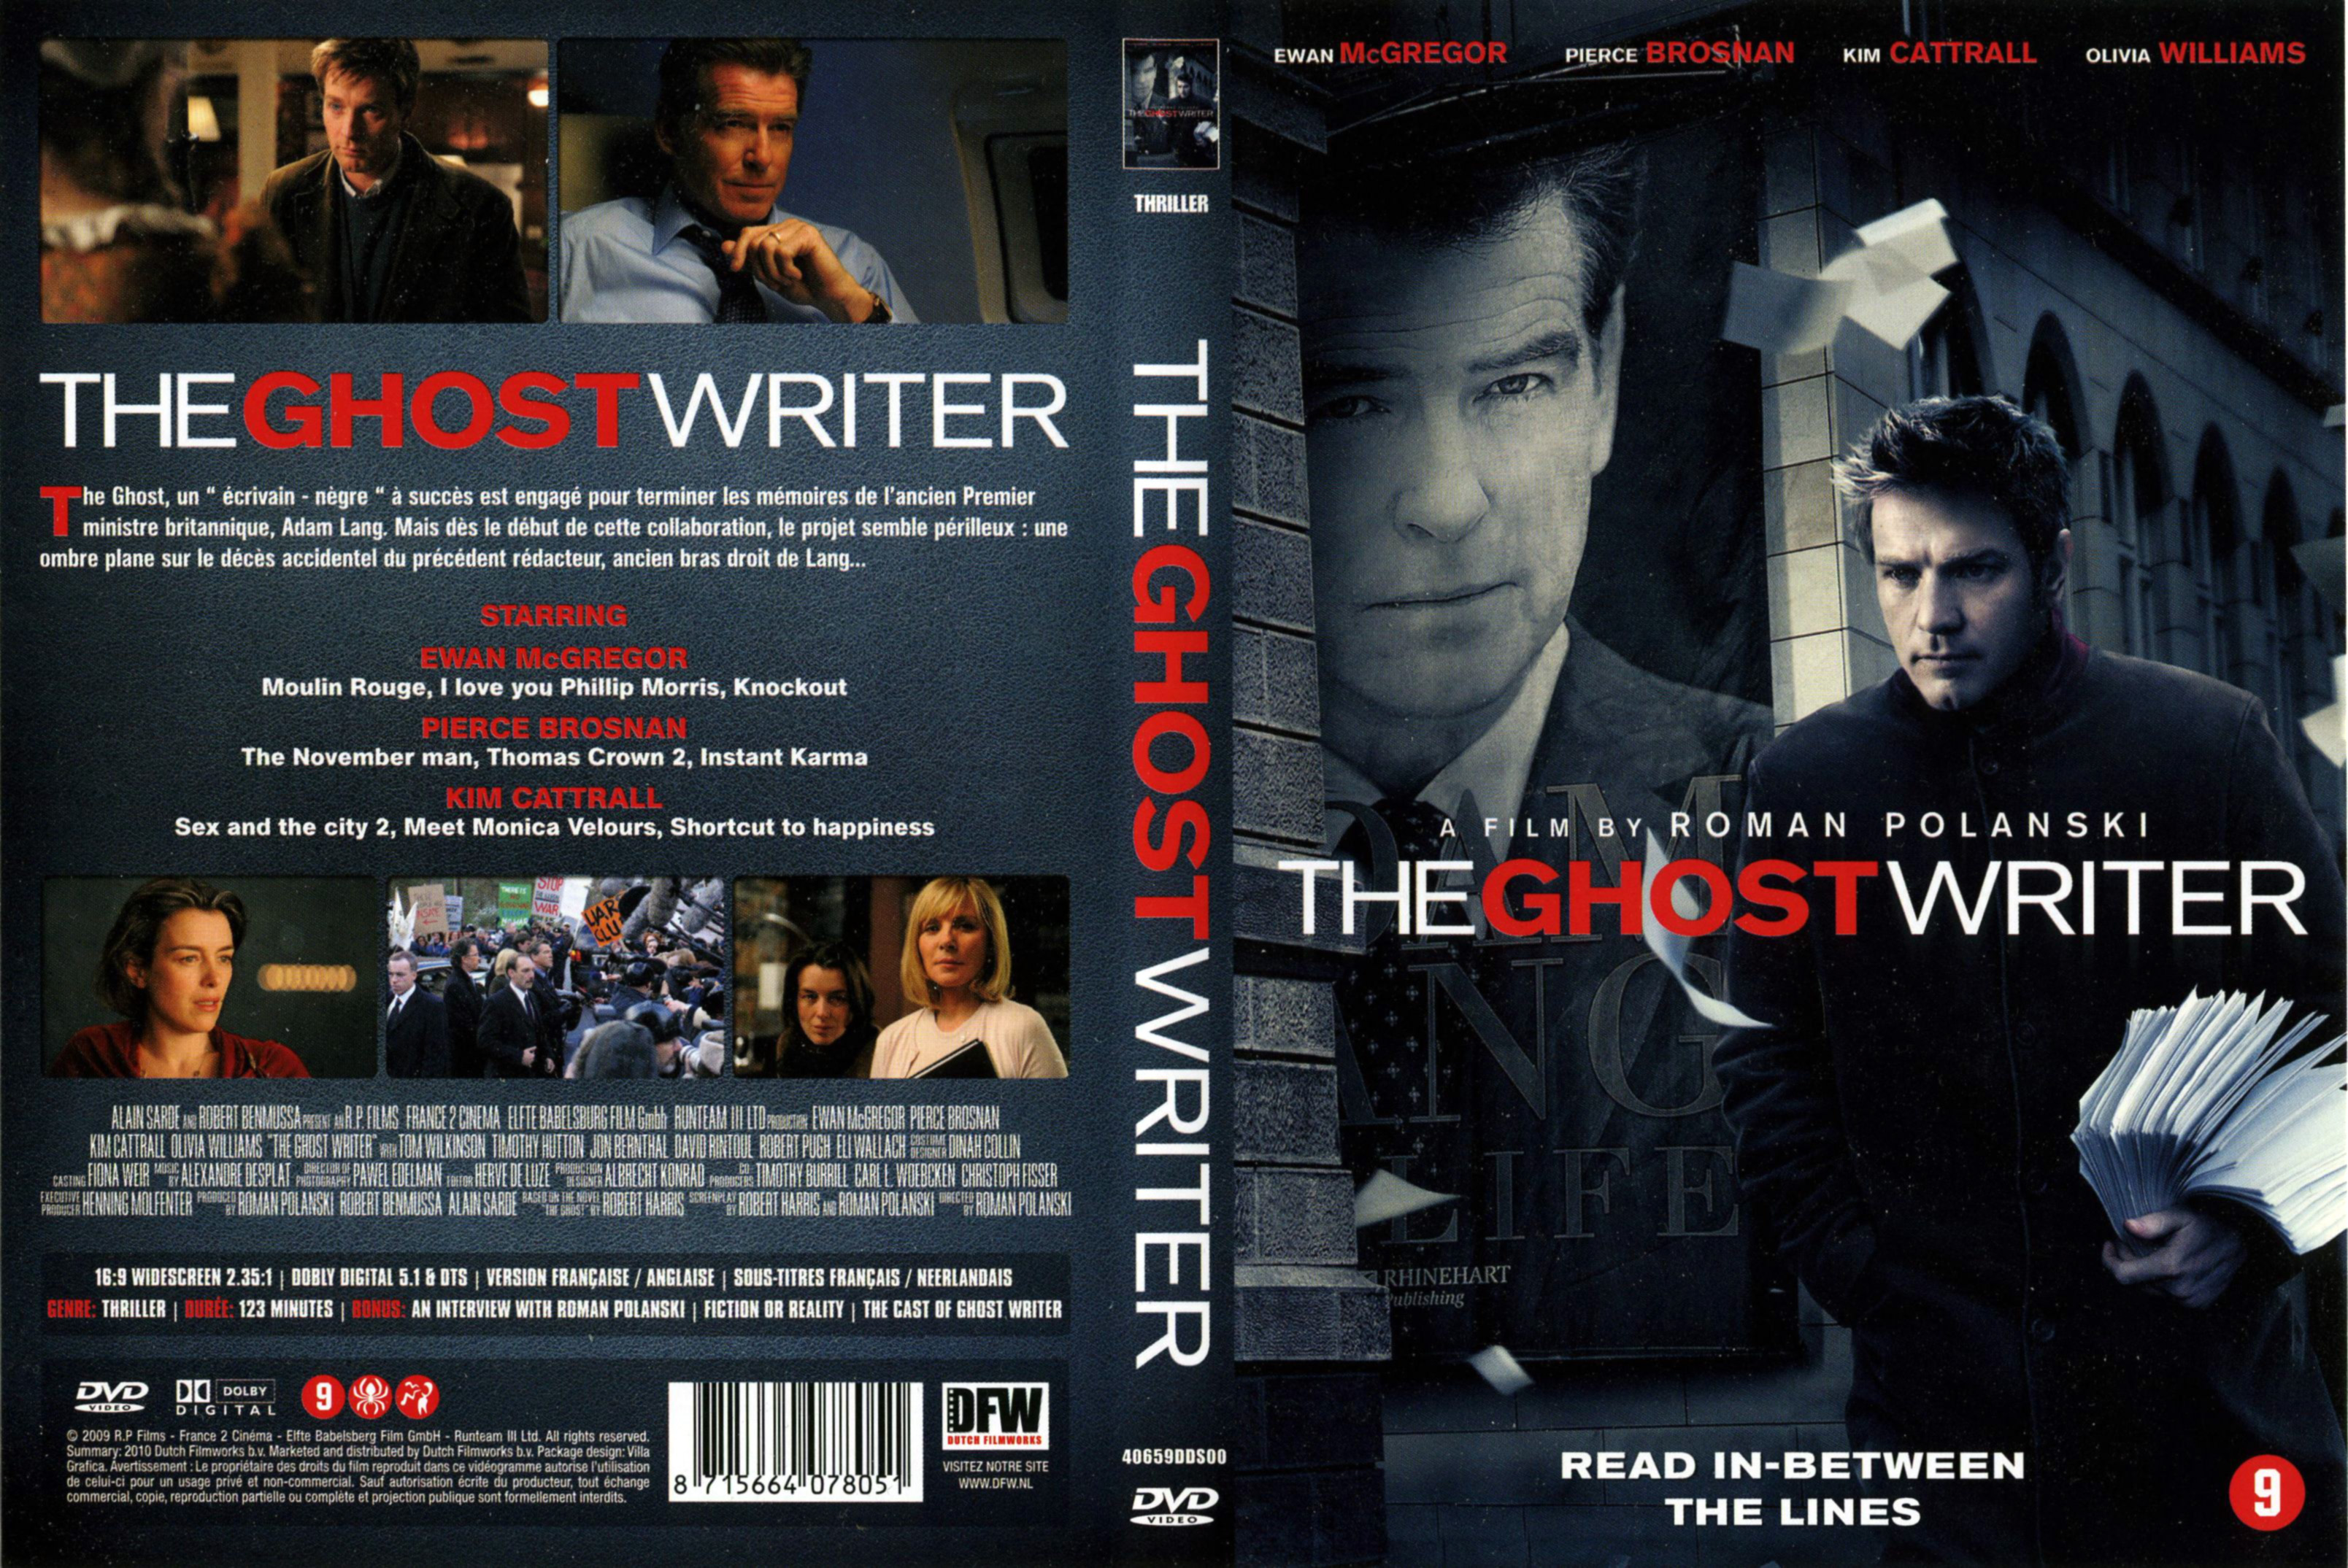 Jaquette DVD The ghost writer v2